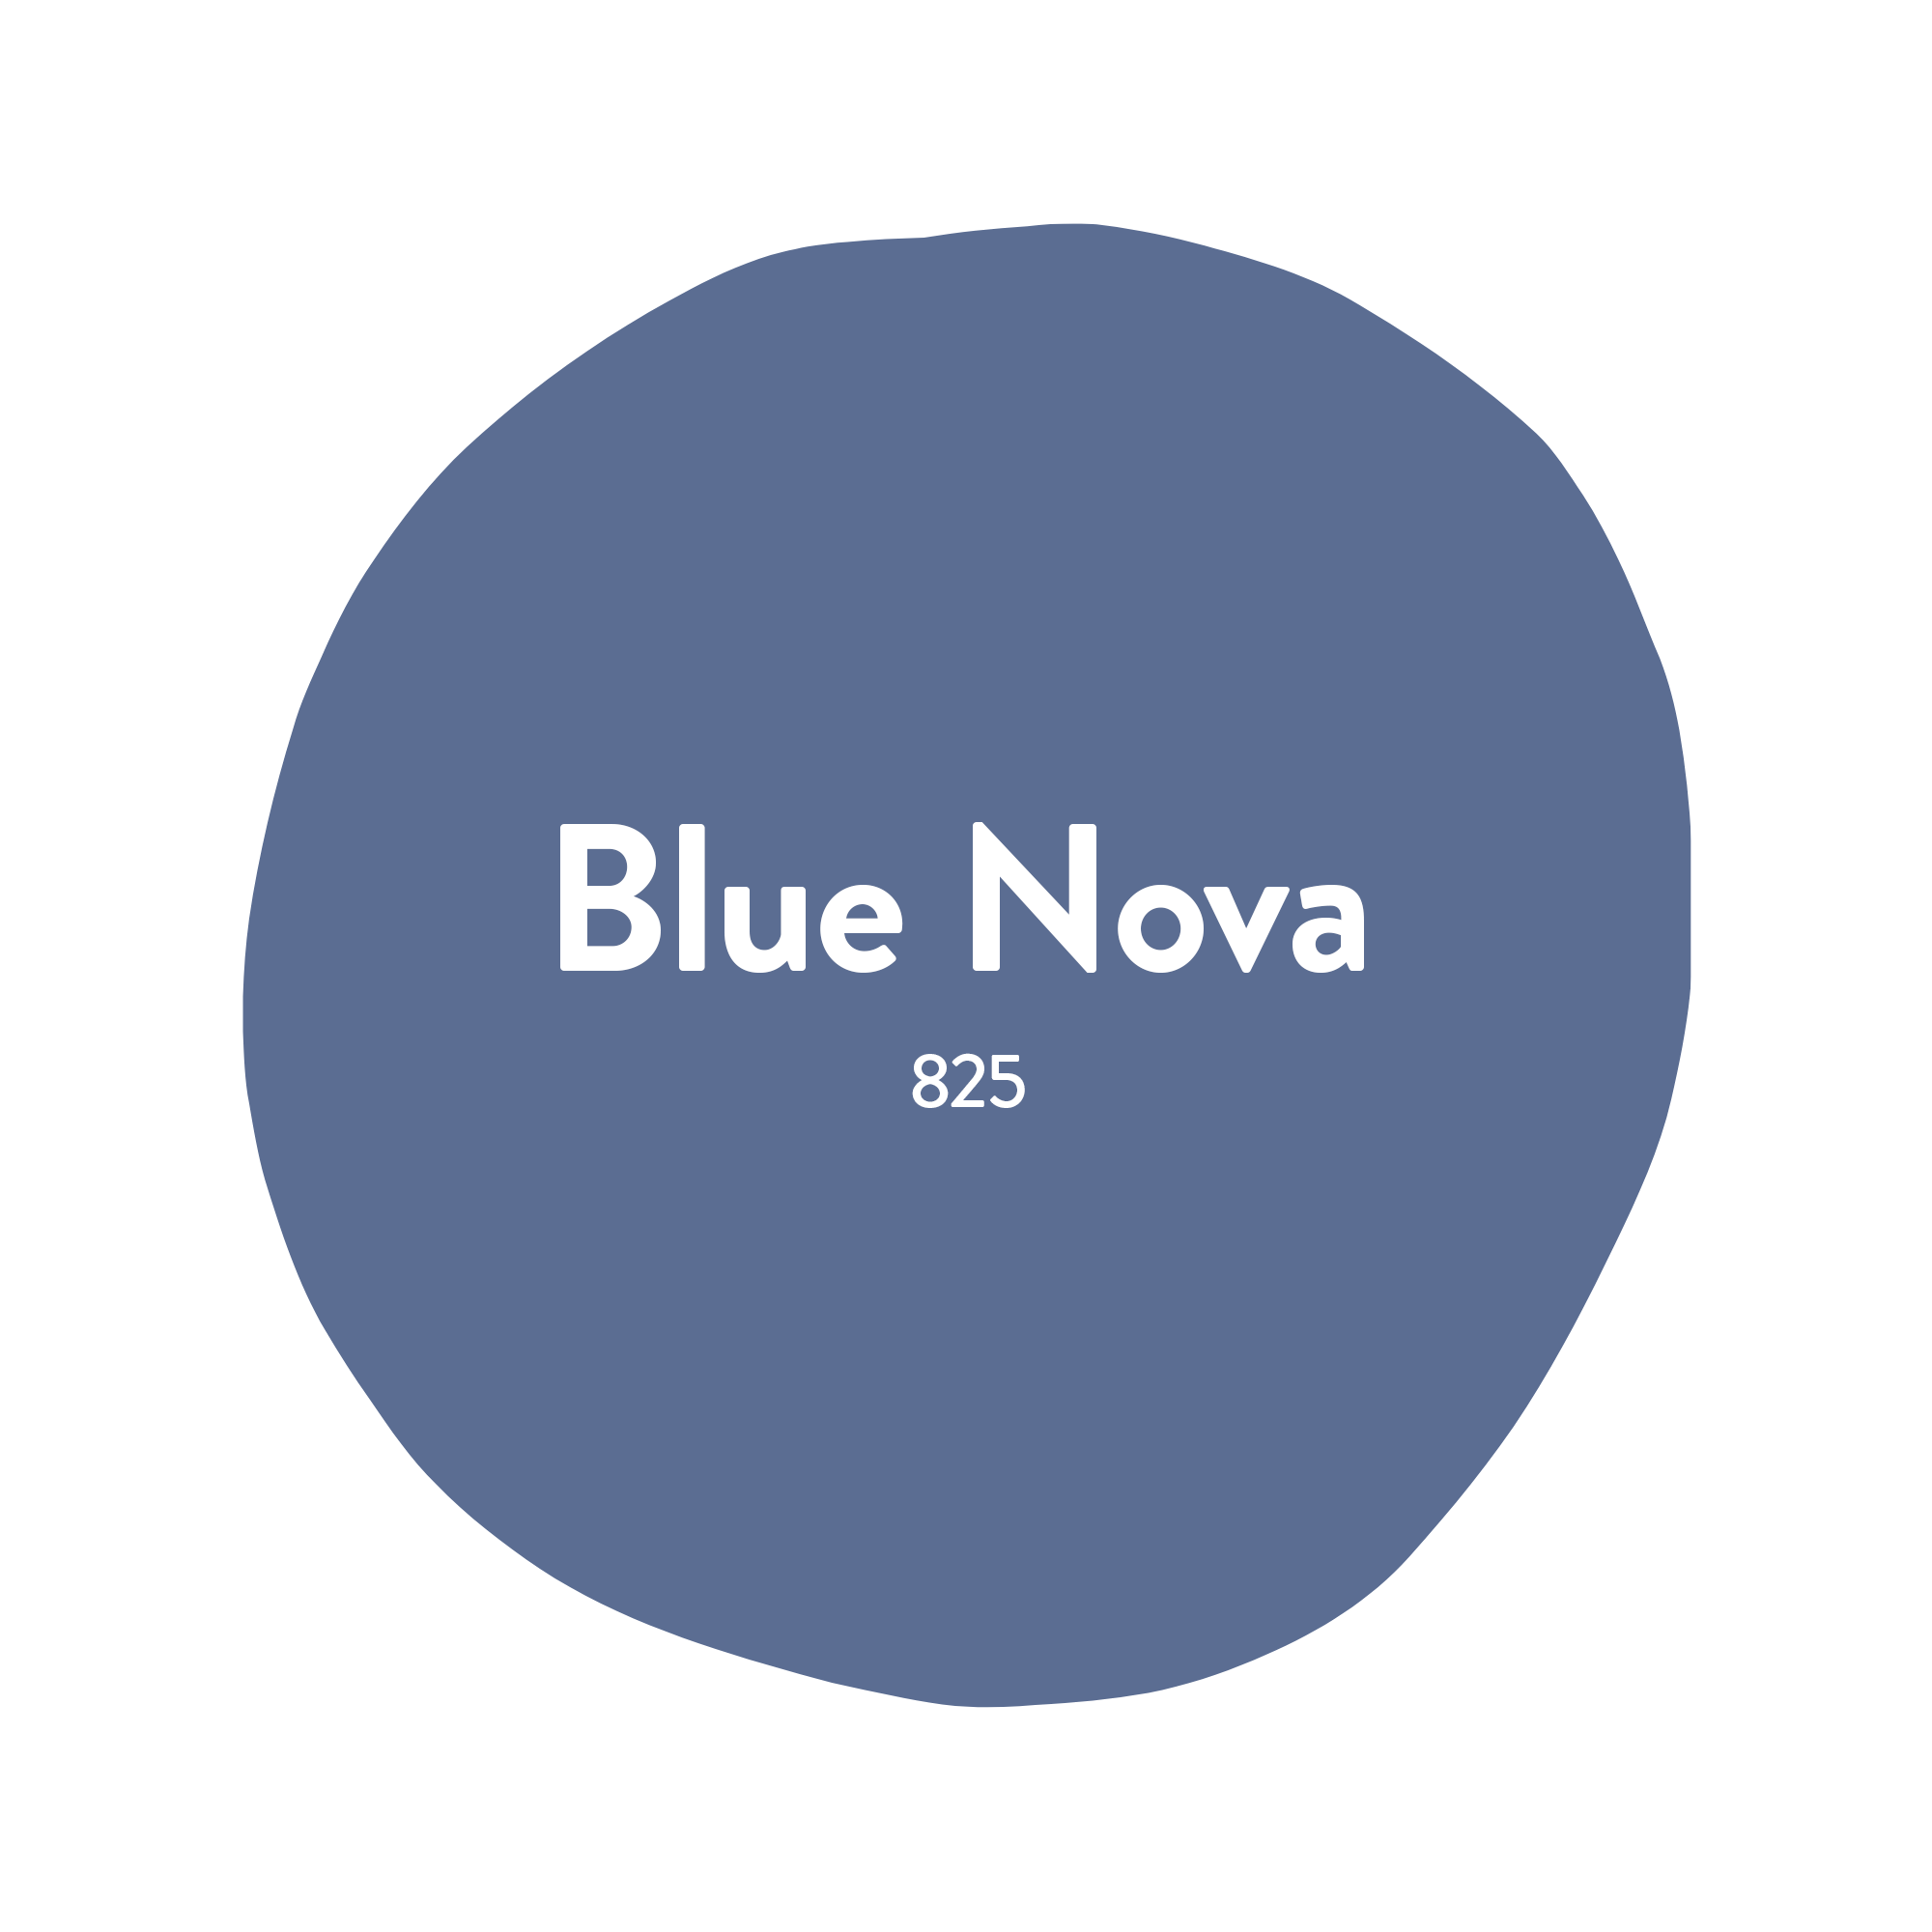 Benjamin Moore's Blue Nova - 825 Recommended by Sonja Pound